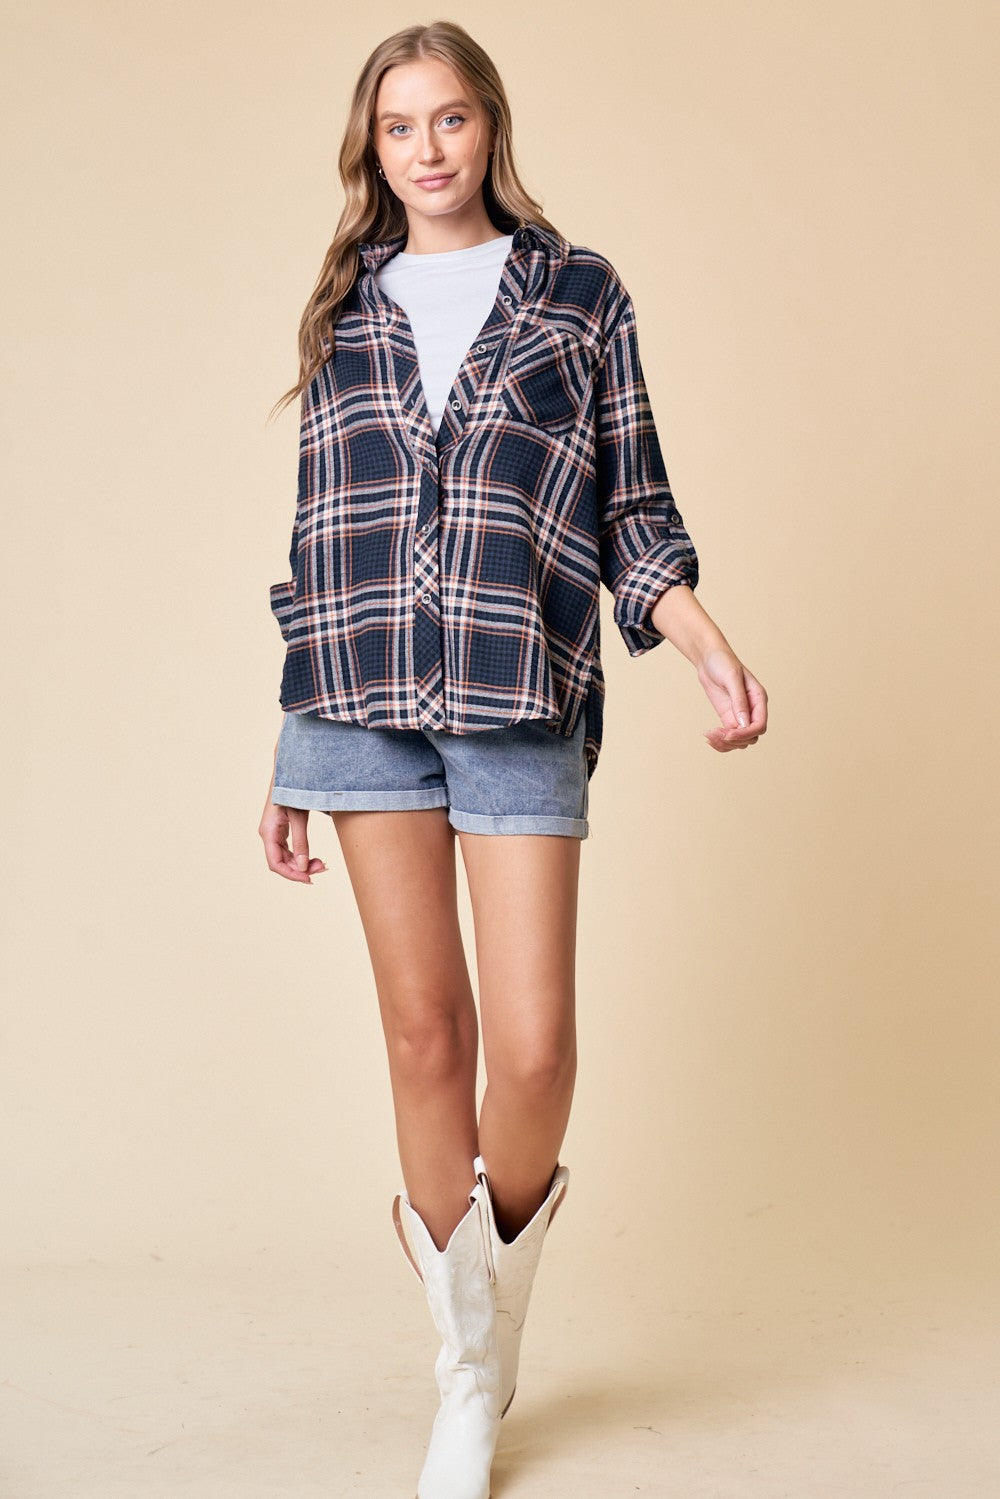 Plaid Navy and Rust Button Up